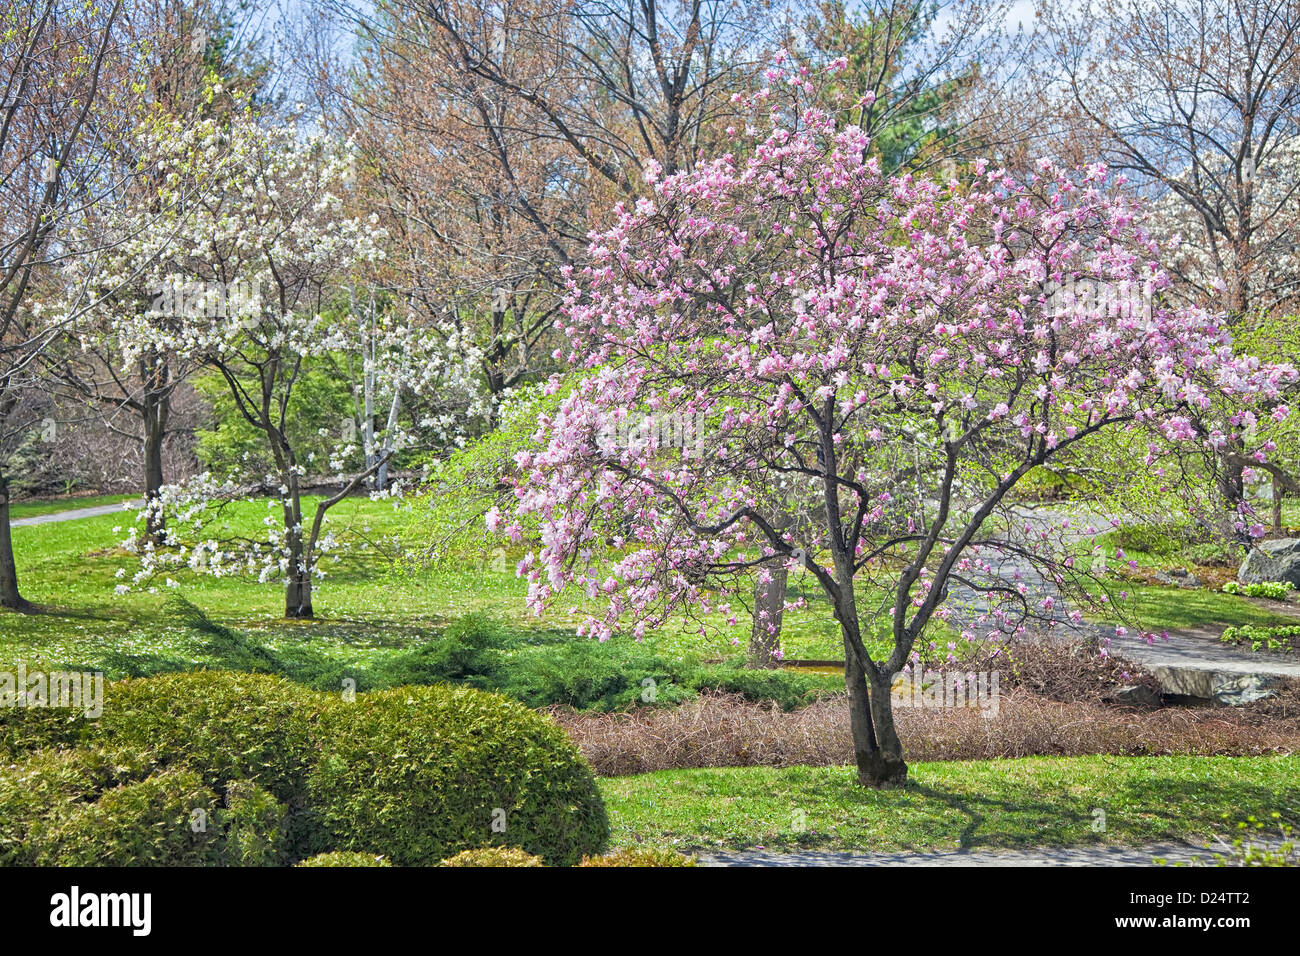 View of spring flowers in the Montreal Botanical Gardens, Montreal, Quebec. Stock Photo